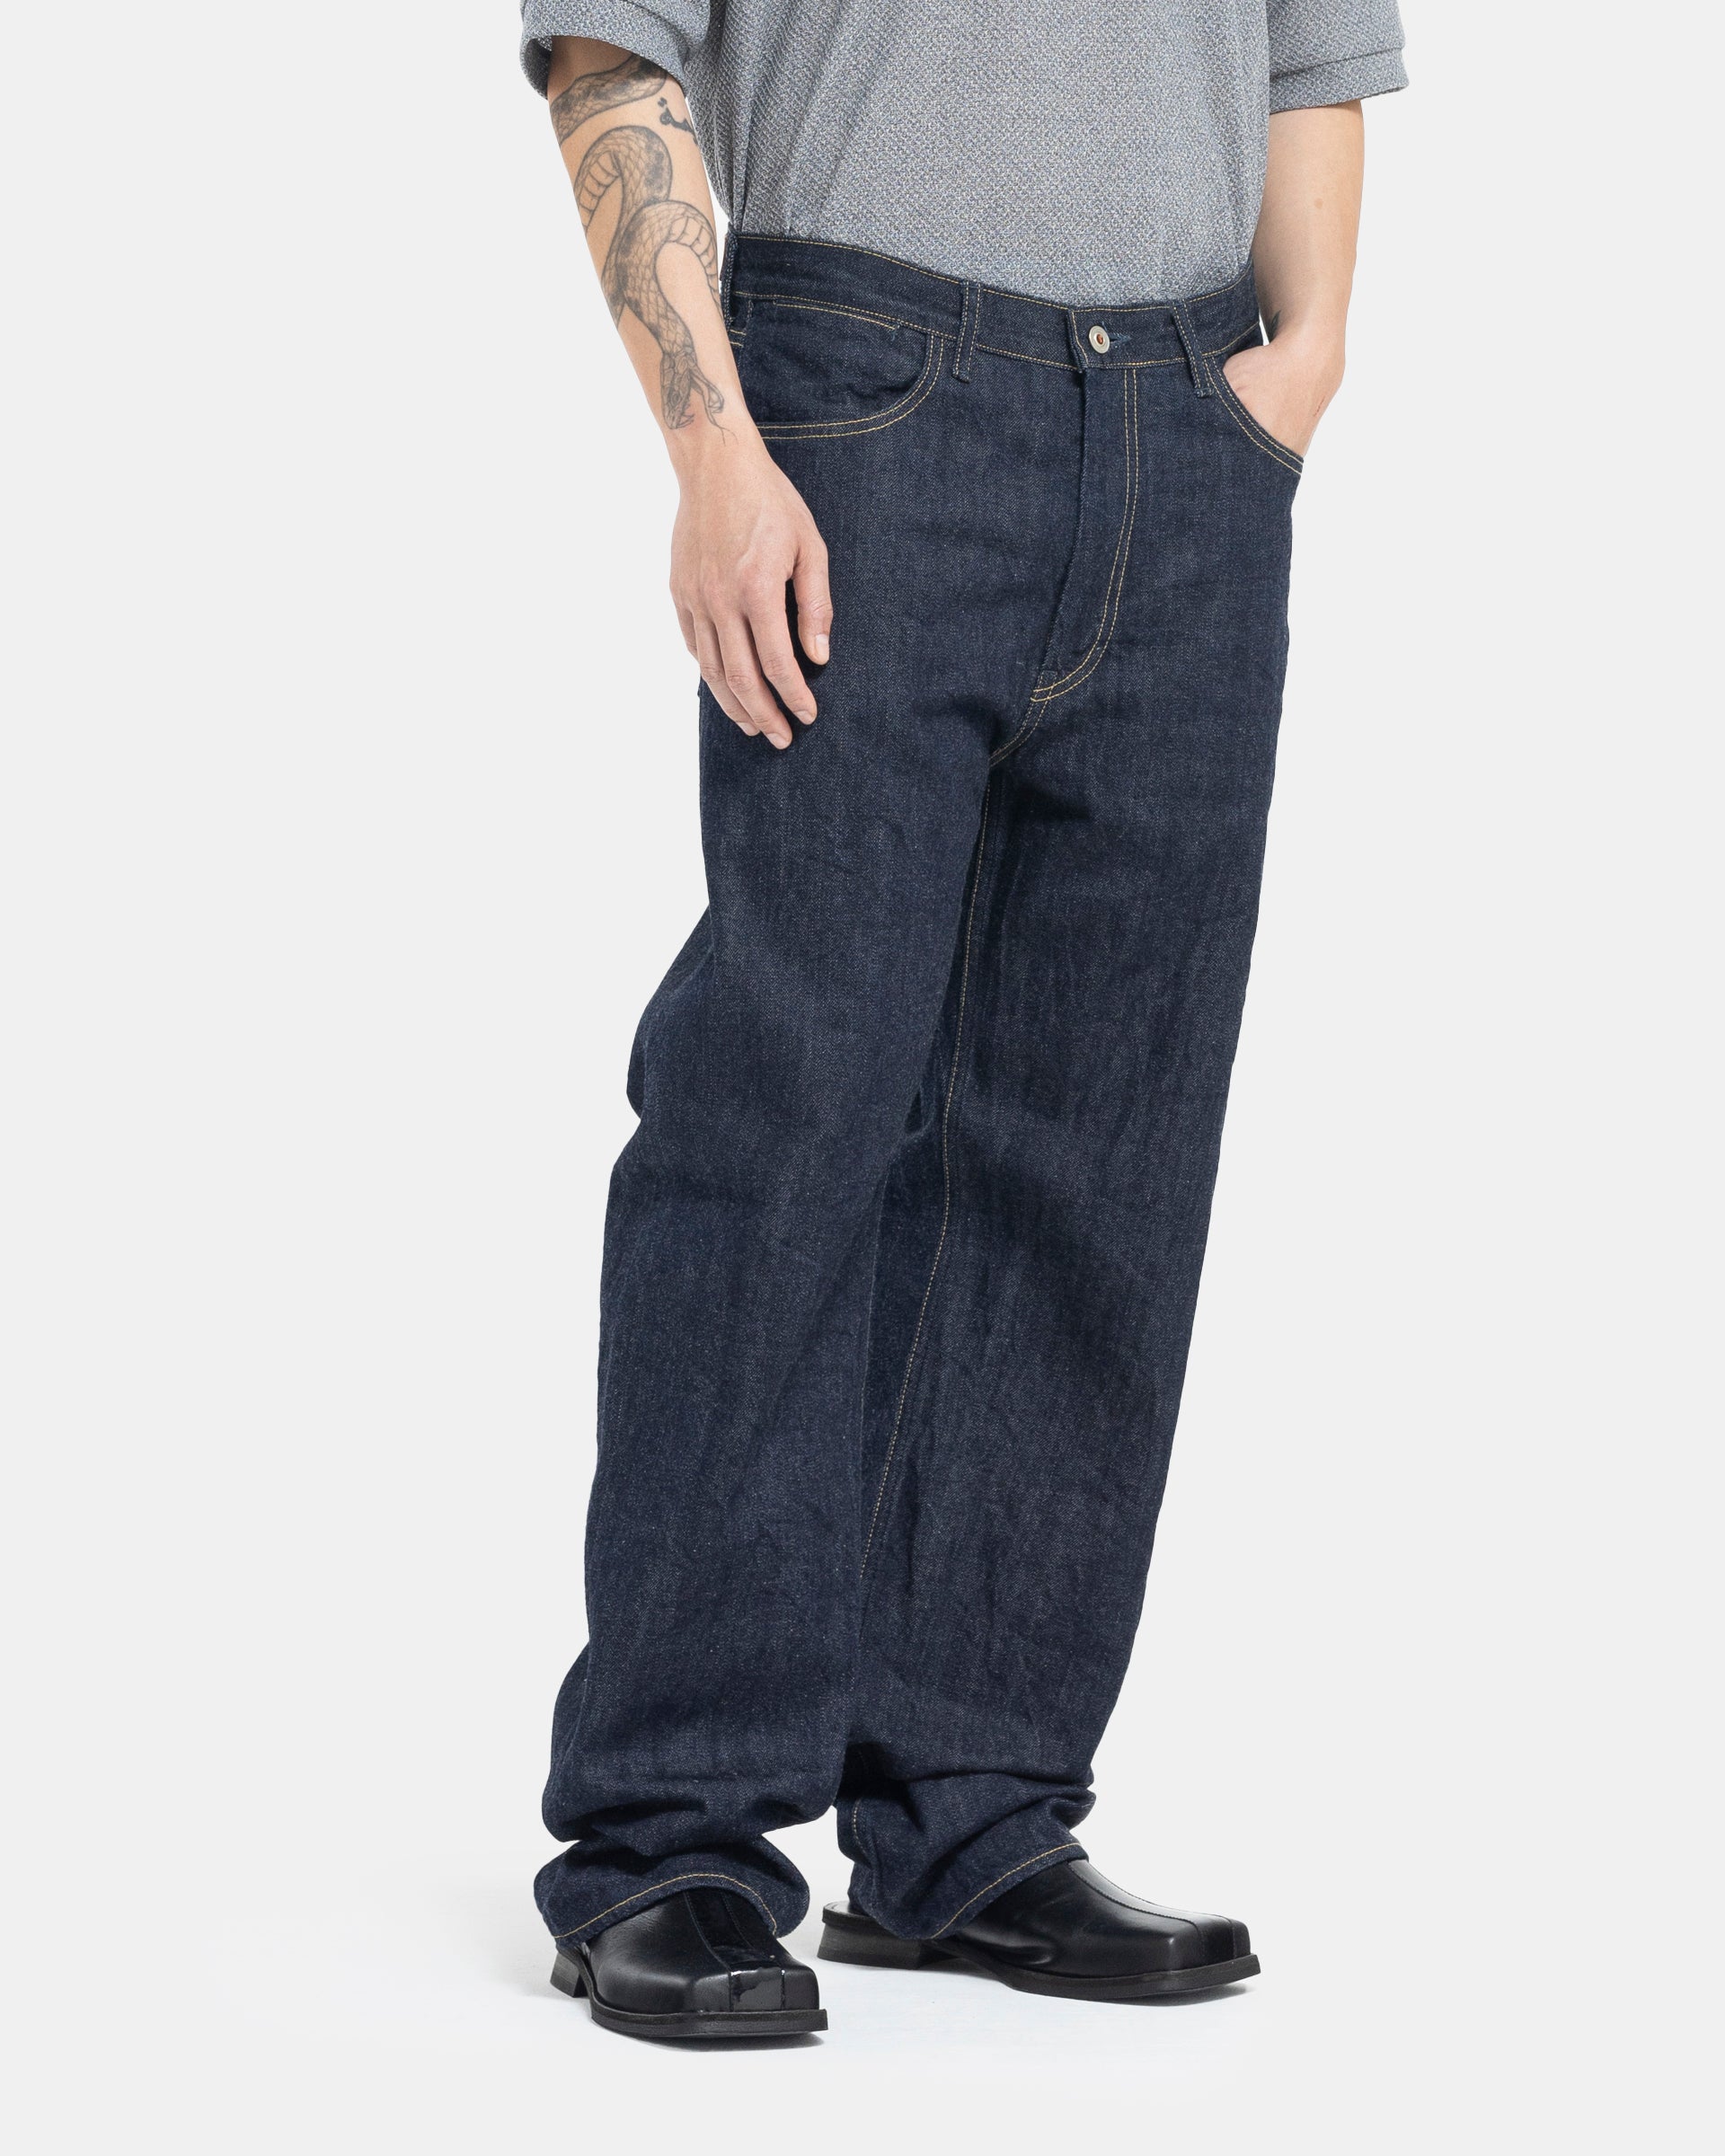 Male model wearing indigo Still By Hand selvedge jeans on white background